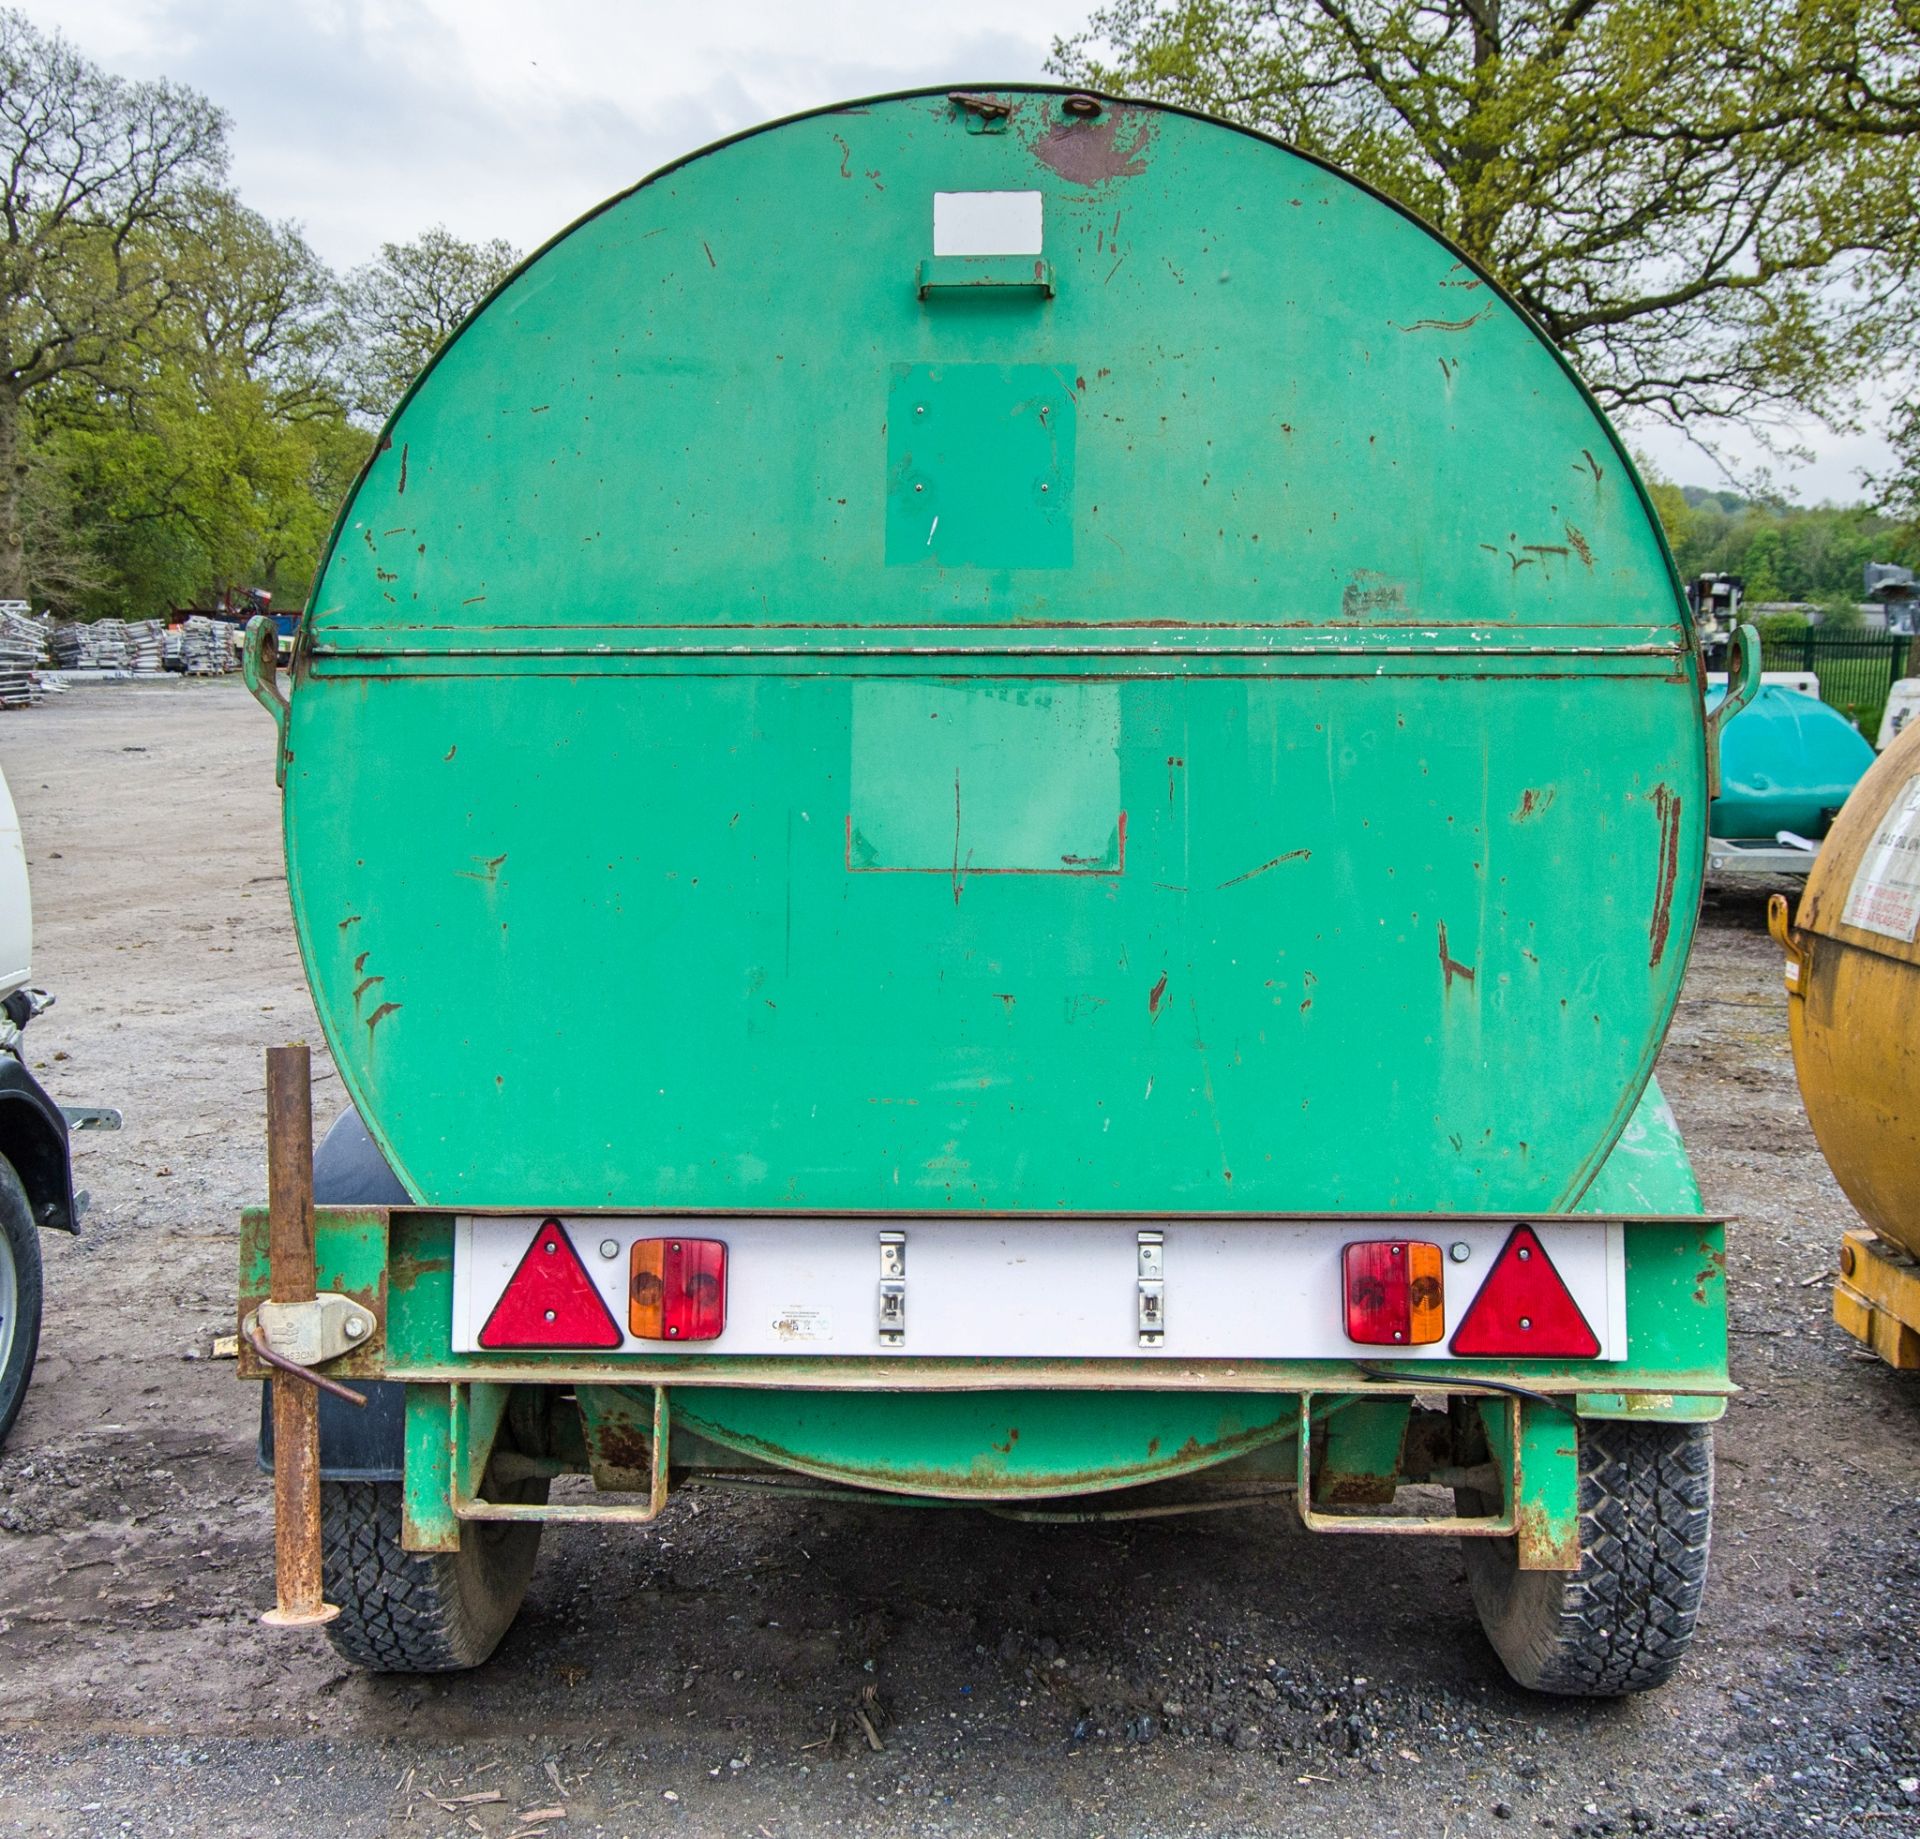 Trailer Engineering 2140 litre single axle fast tow mobile bunded fuel bowser c/w manual pump. - Image 6 of 7